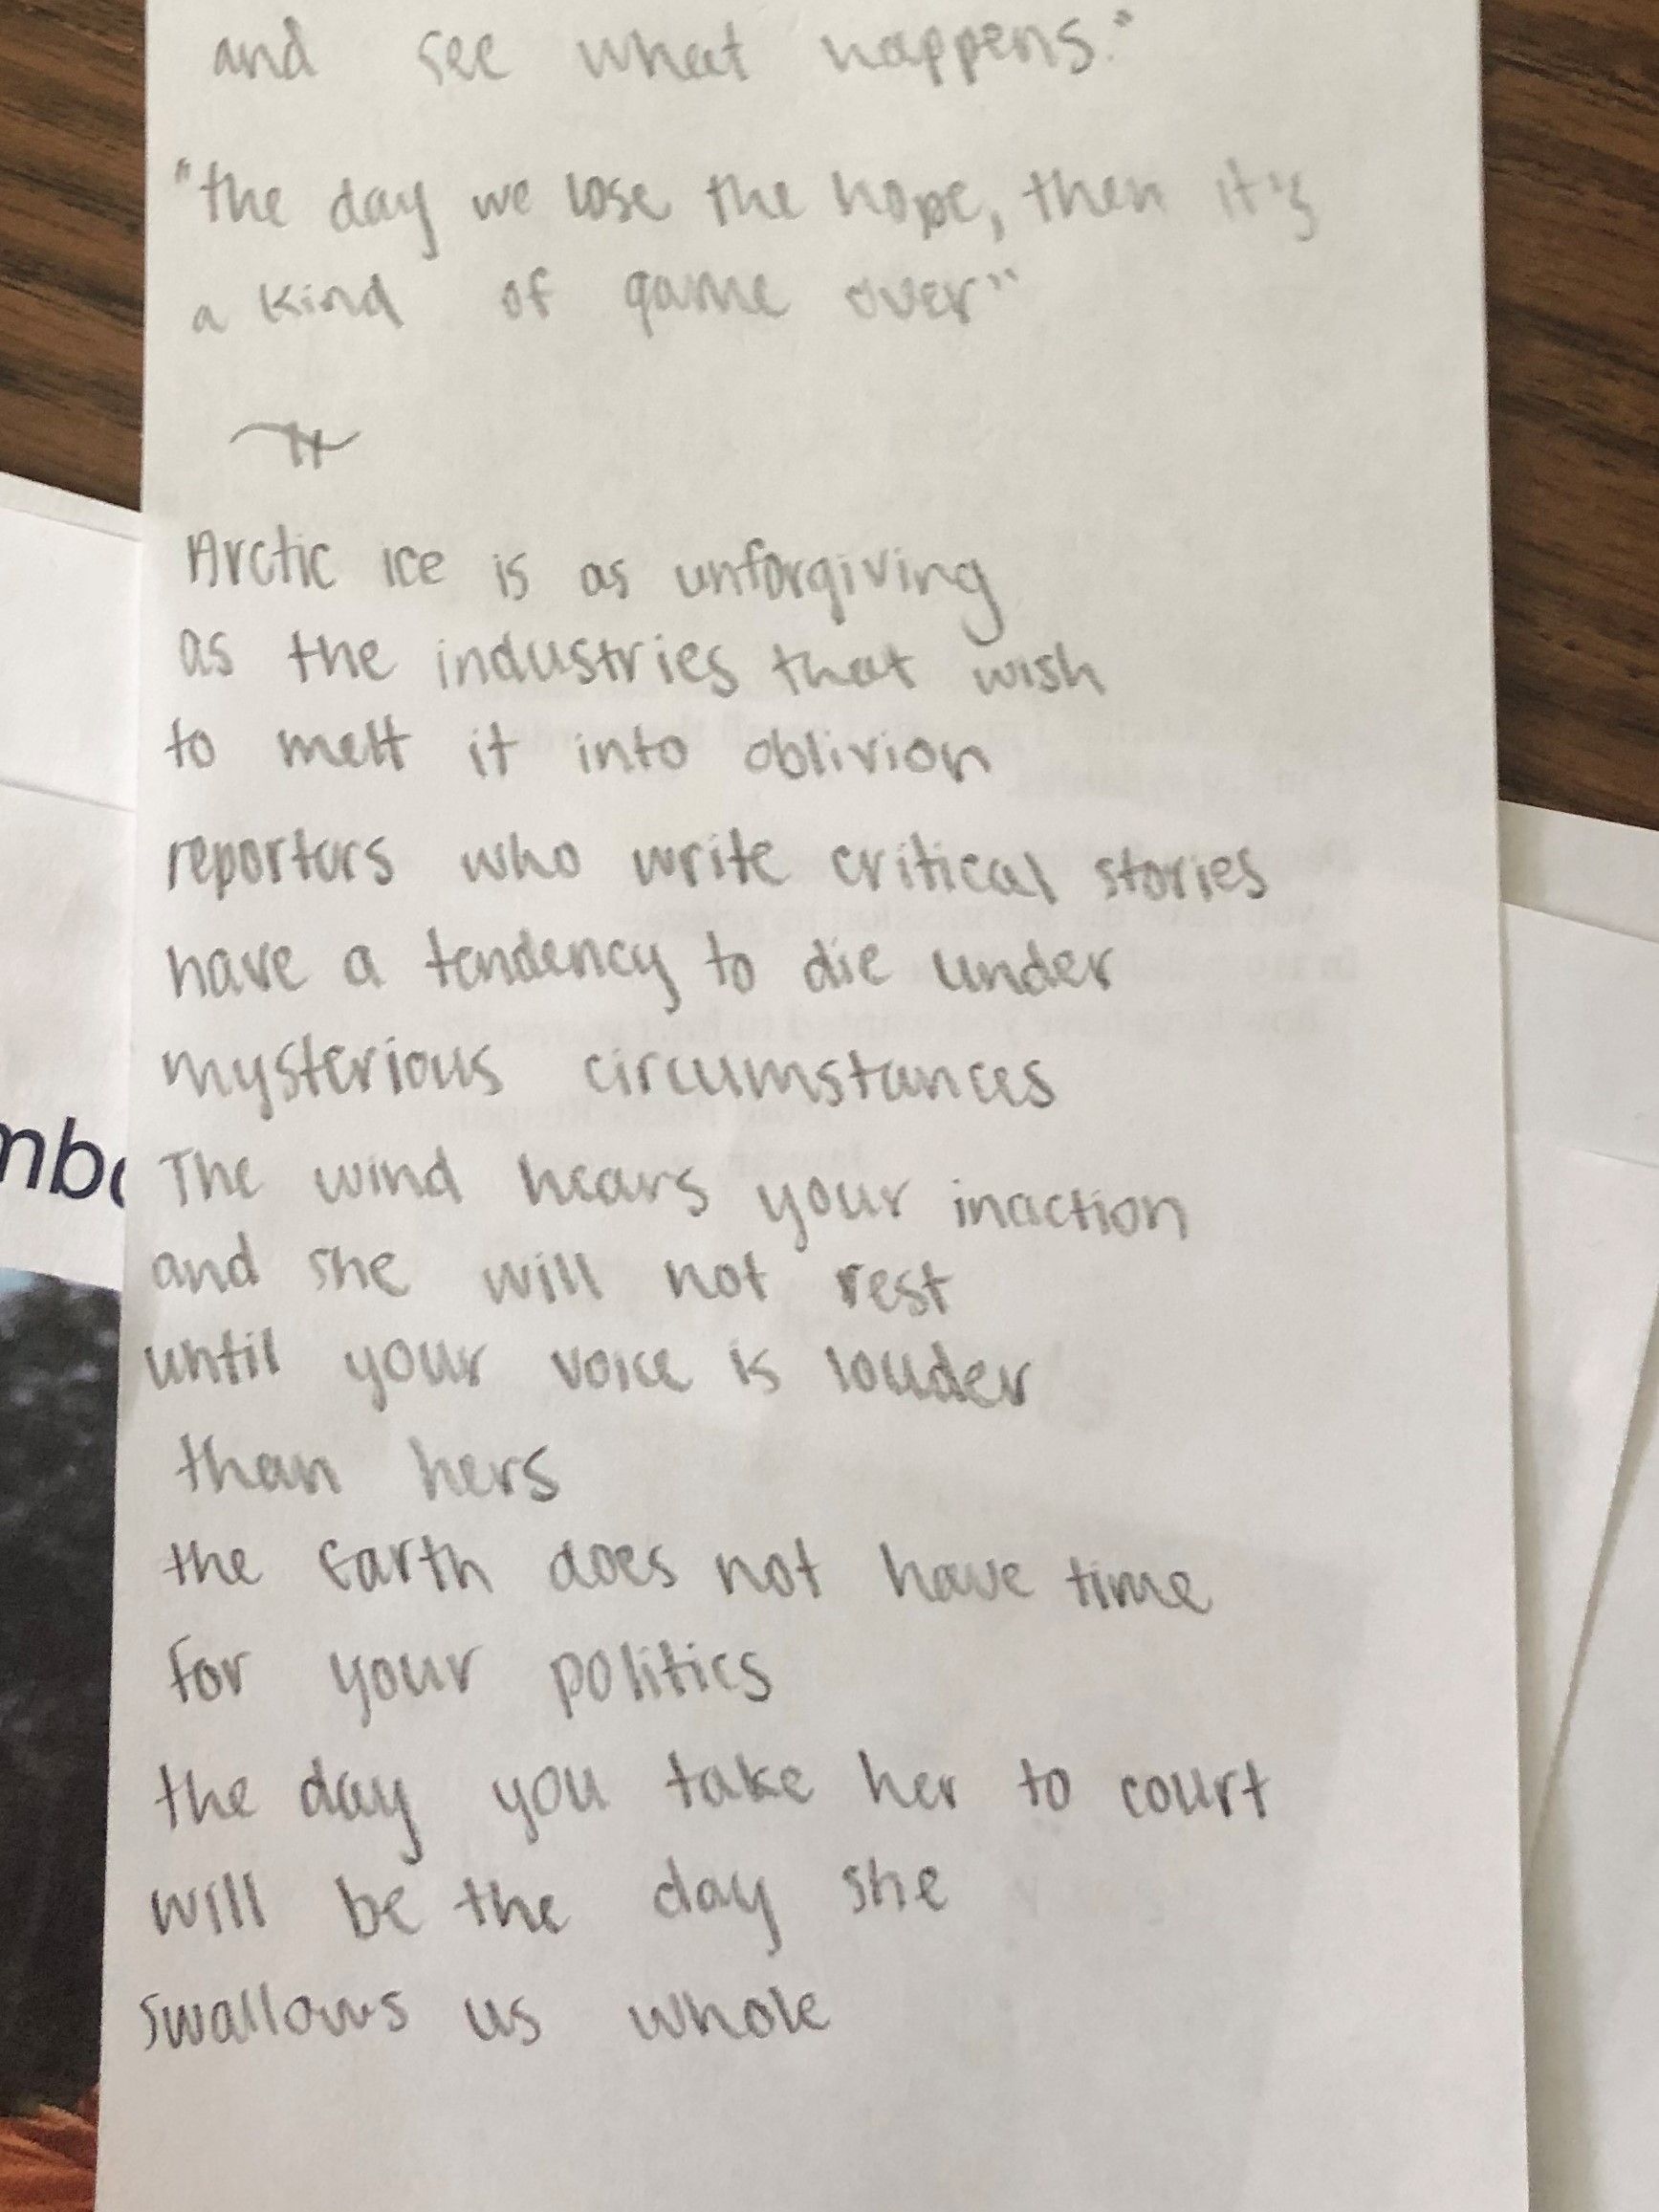 Poem by a student at RJ Reynolds High School, written in response to "An Environmental Newspaper Fights for Press Freedom in the Russian Arctic" by Amy Martin. Image by Hannah Berk. United States, 2019.